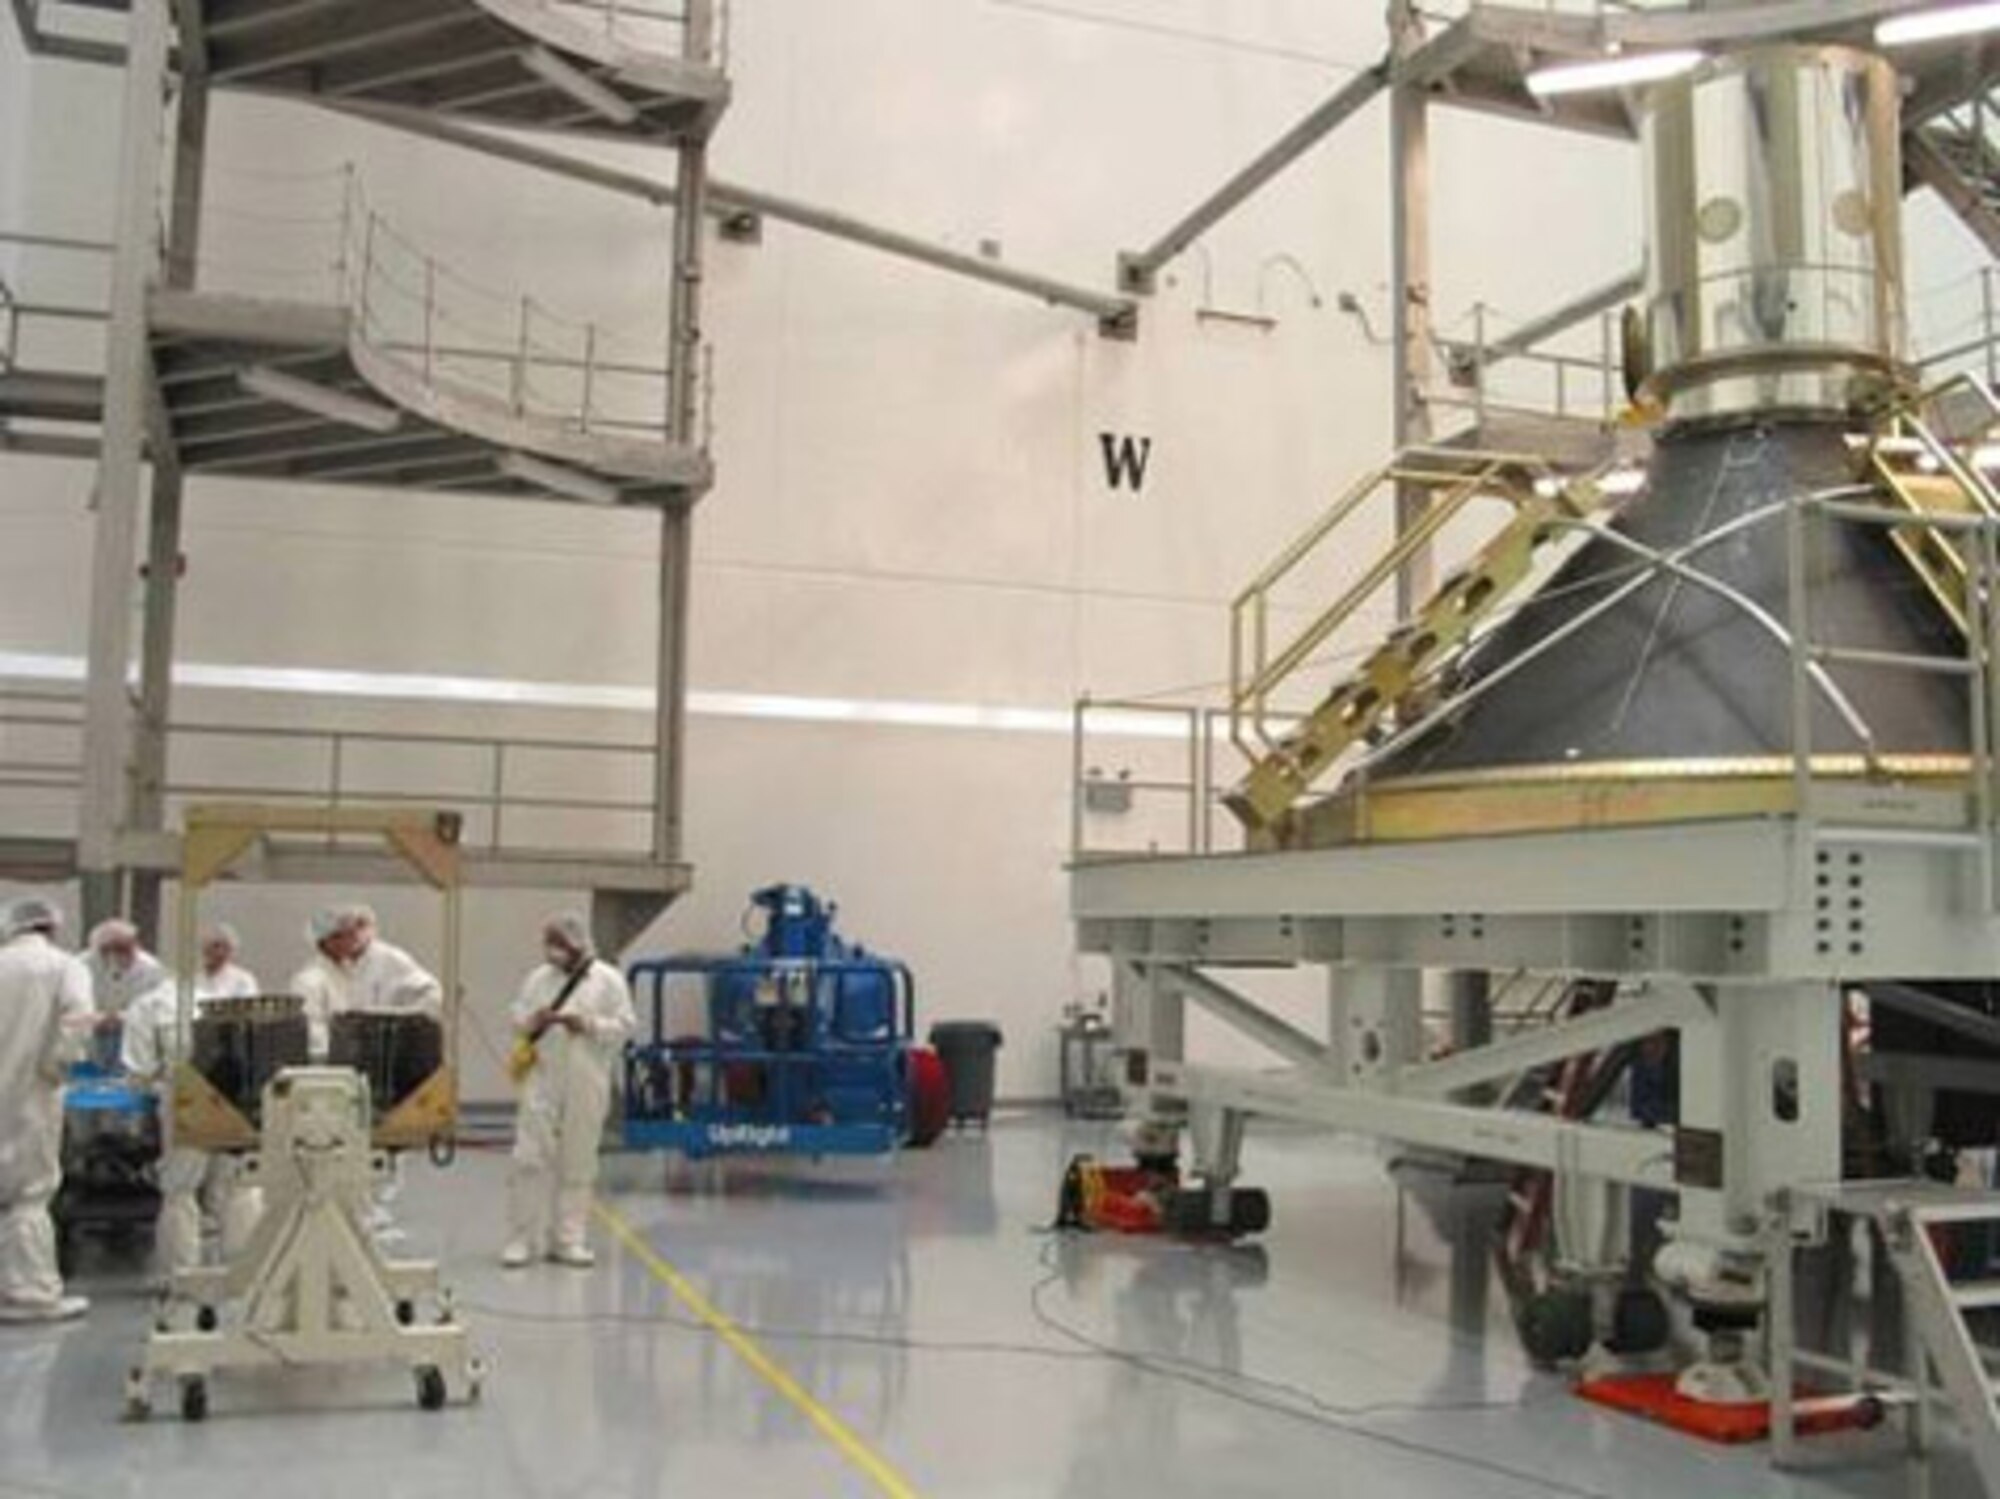 KIRTLAND AIR FORCE BASE, N.M. (AFMCNS) -- NanoSat-2 (two satellites sitting on the triangular white stand, lower left-hand corner) undergo integration and testing at Air Force Research Laboratory, Space Vehicles Directorate, Kirtland Air Force Base, N.M. The Boeing Delta-IV heavy is on the right with DemoSat (the other payload) on top of it. (Air Force photo courtesy of Scott Franke)